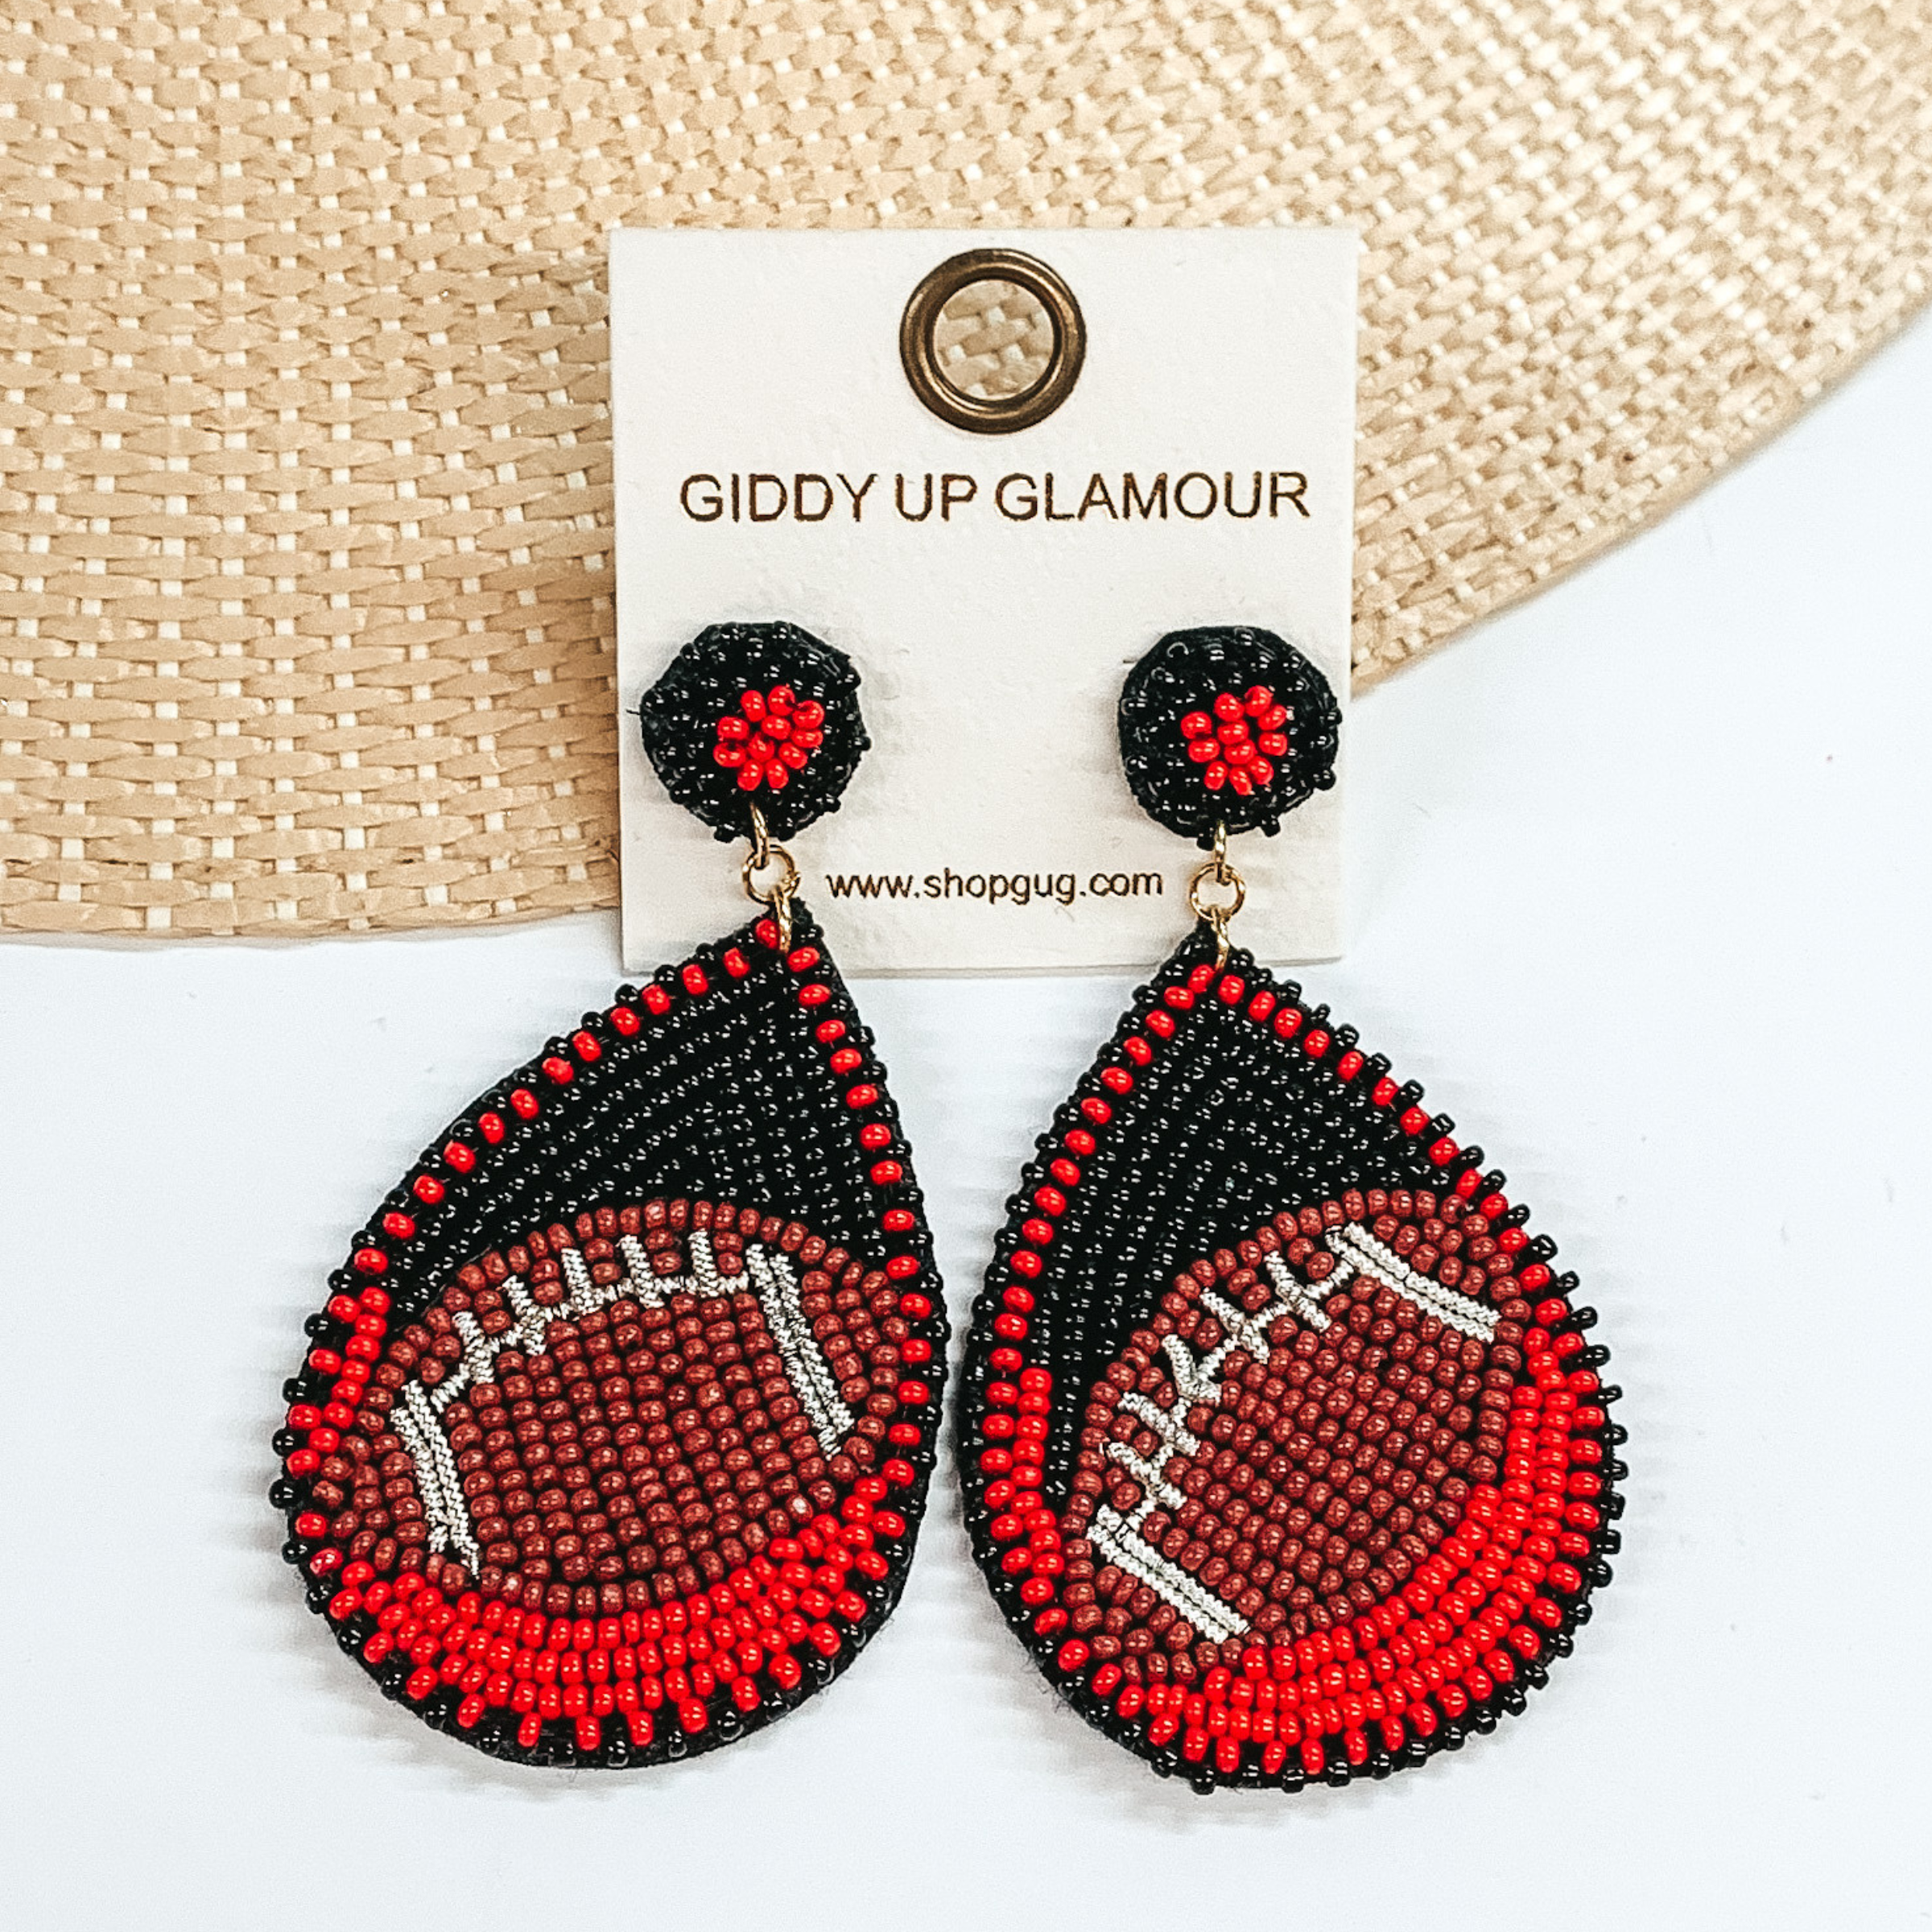 Pictured are a pair of beaded post back earrings with teardrop pendants. These earrings include black and red beads with a brown football design. These earrings are pictured laying in a straw hat brim on a white background.